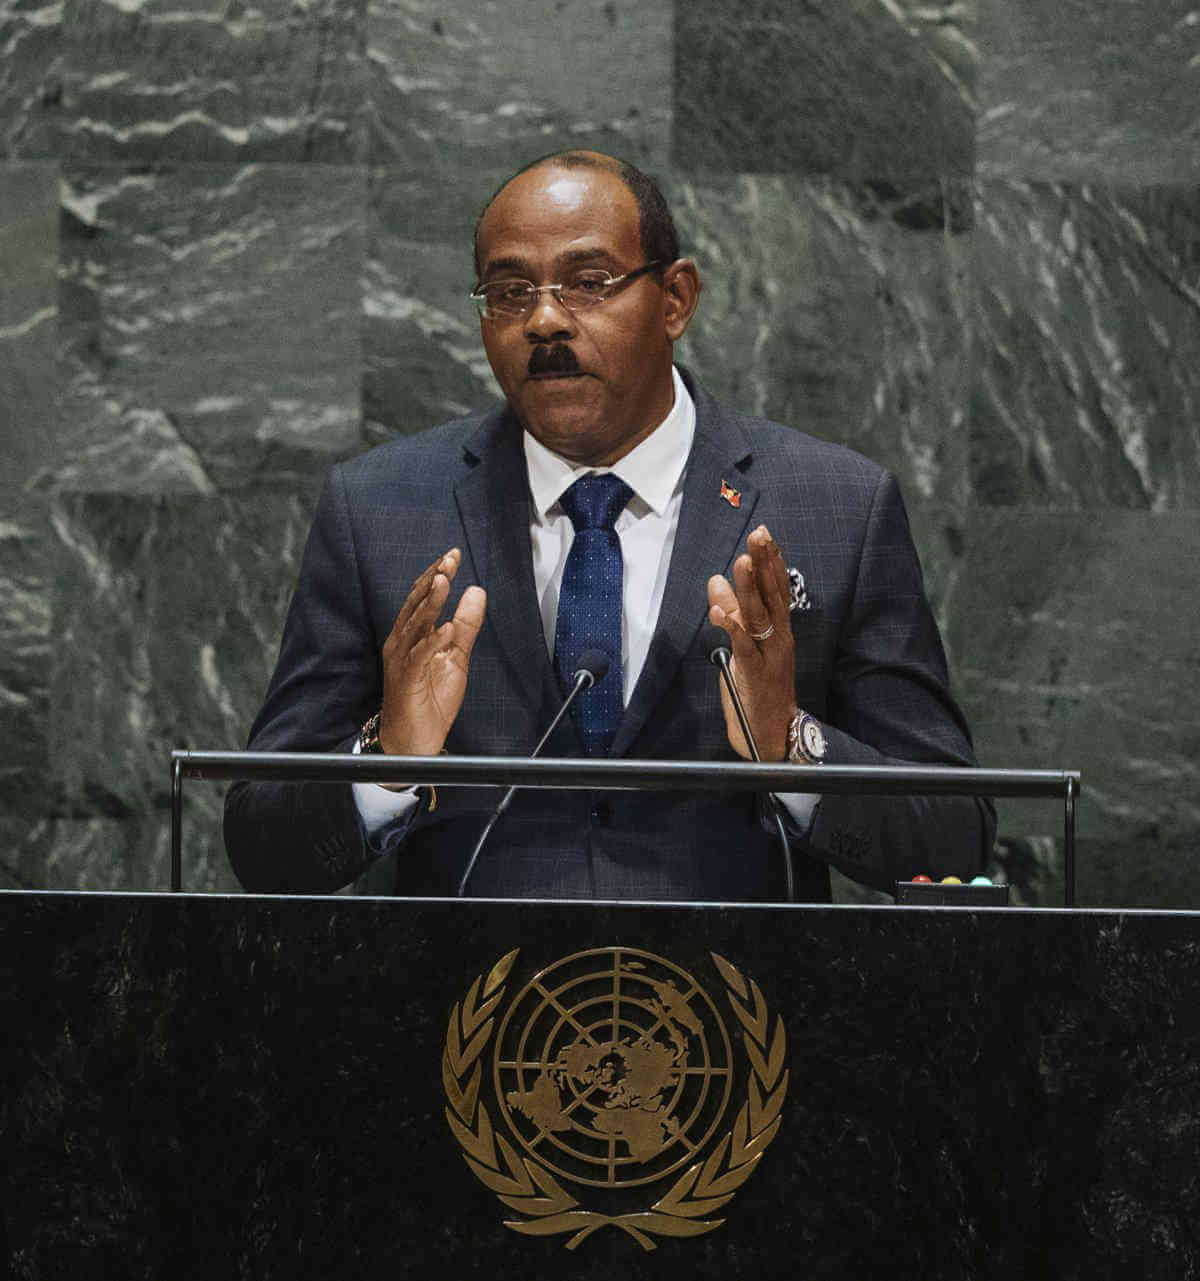 Antigua and Barbuda's Prime Minister, Gaston Alphonso Browne addresses the 74th session of the United Nations General Assembly at the U.N. headquarters Friday, Sept. 27, 2019.